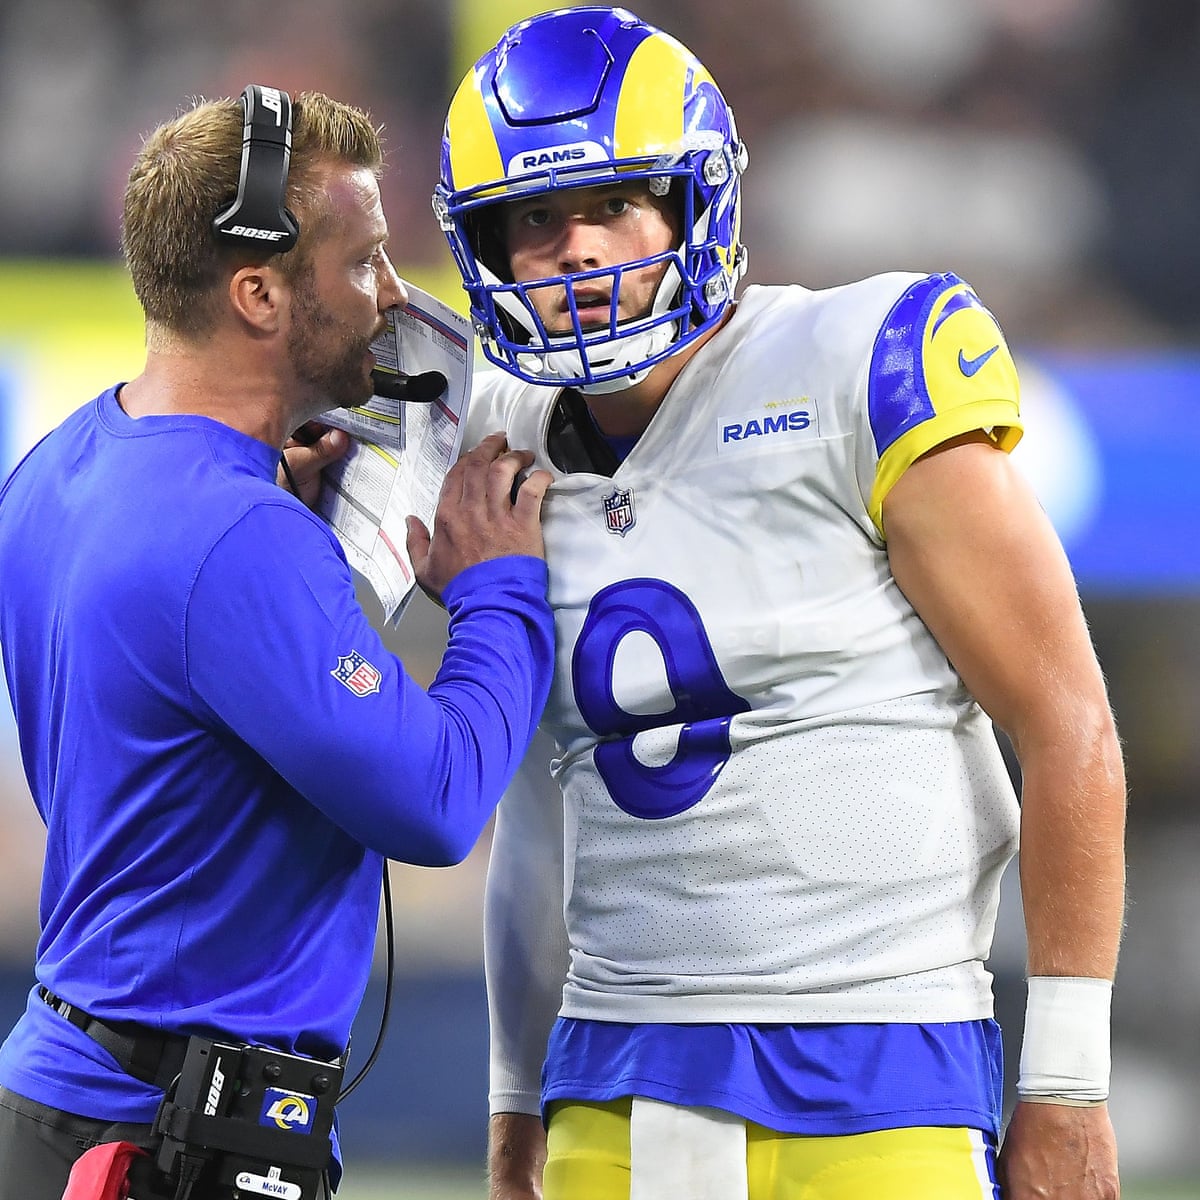 Week by week the LA Rams are trading away their future. And they don't care, Los Angeles Rams